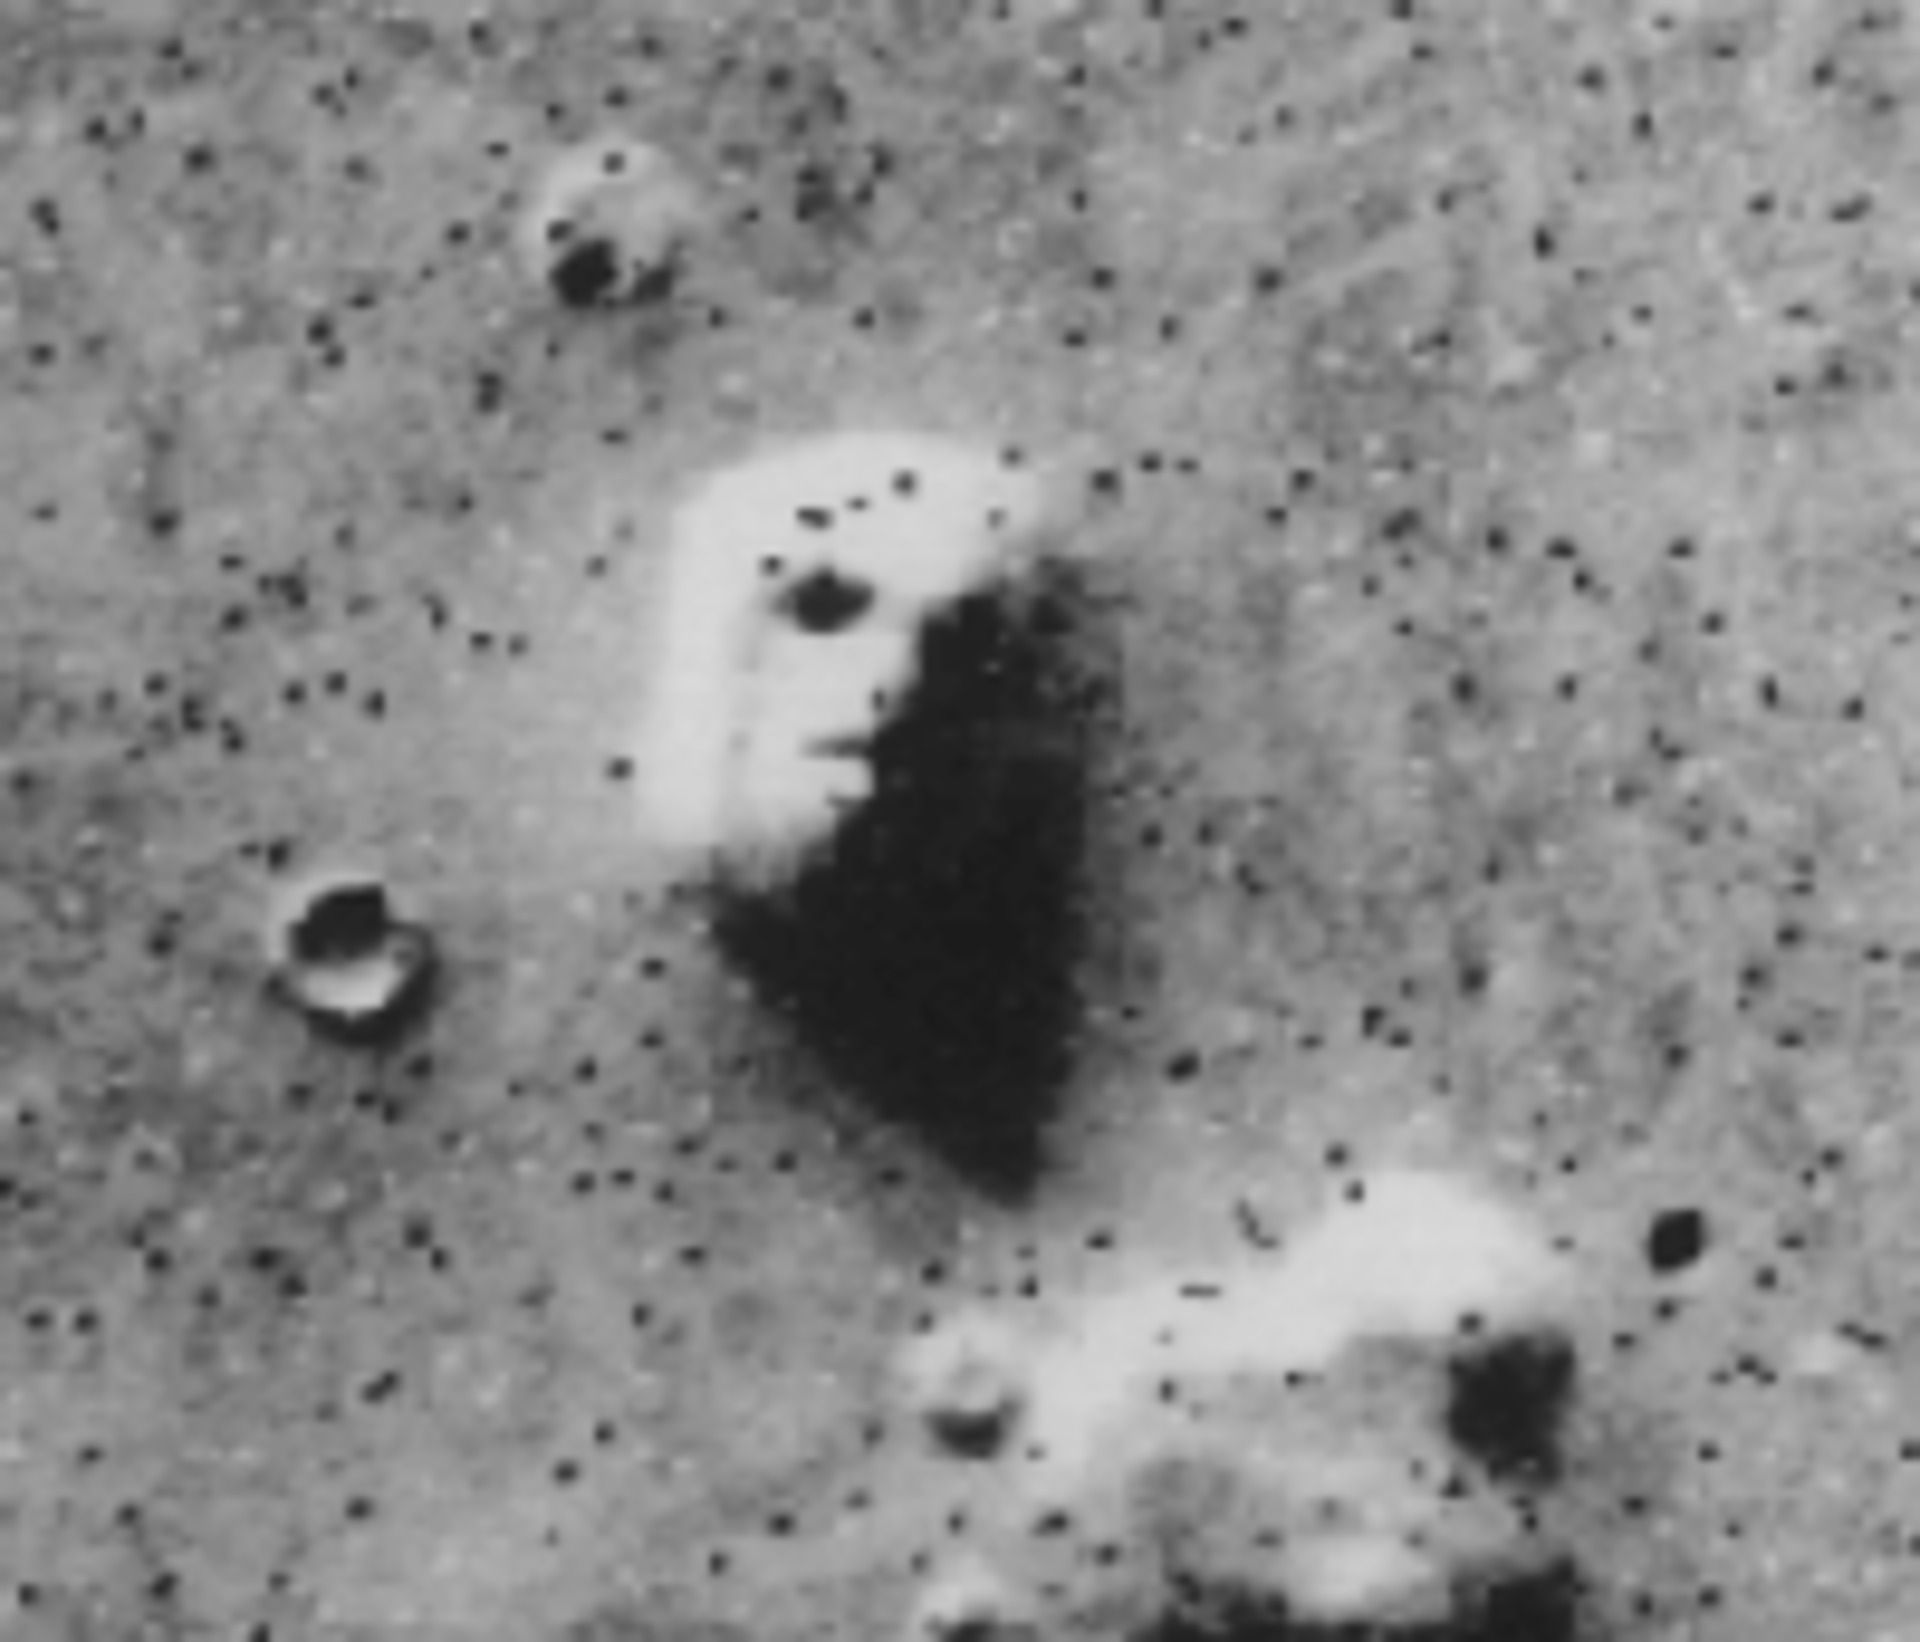 The so-called "Face on Mars"